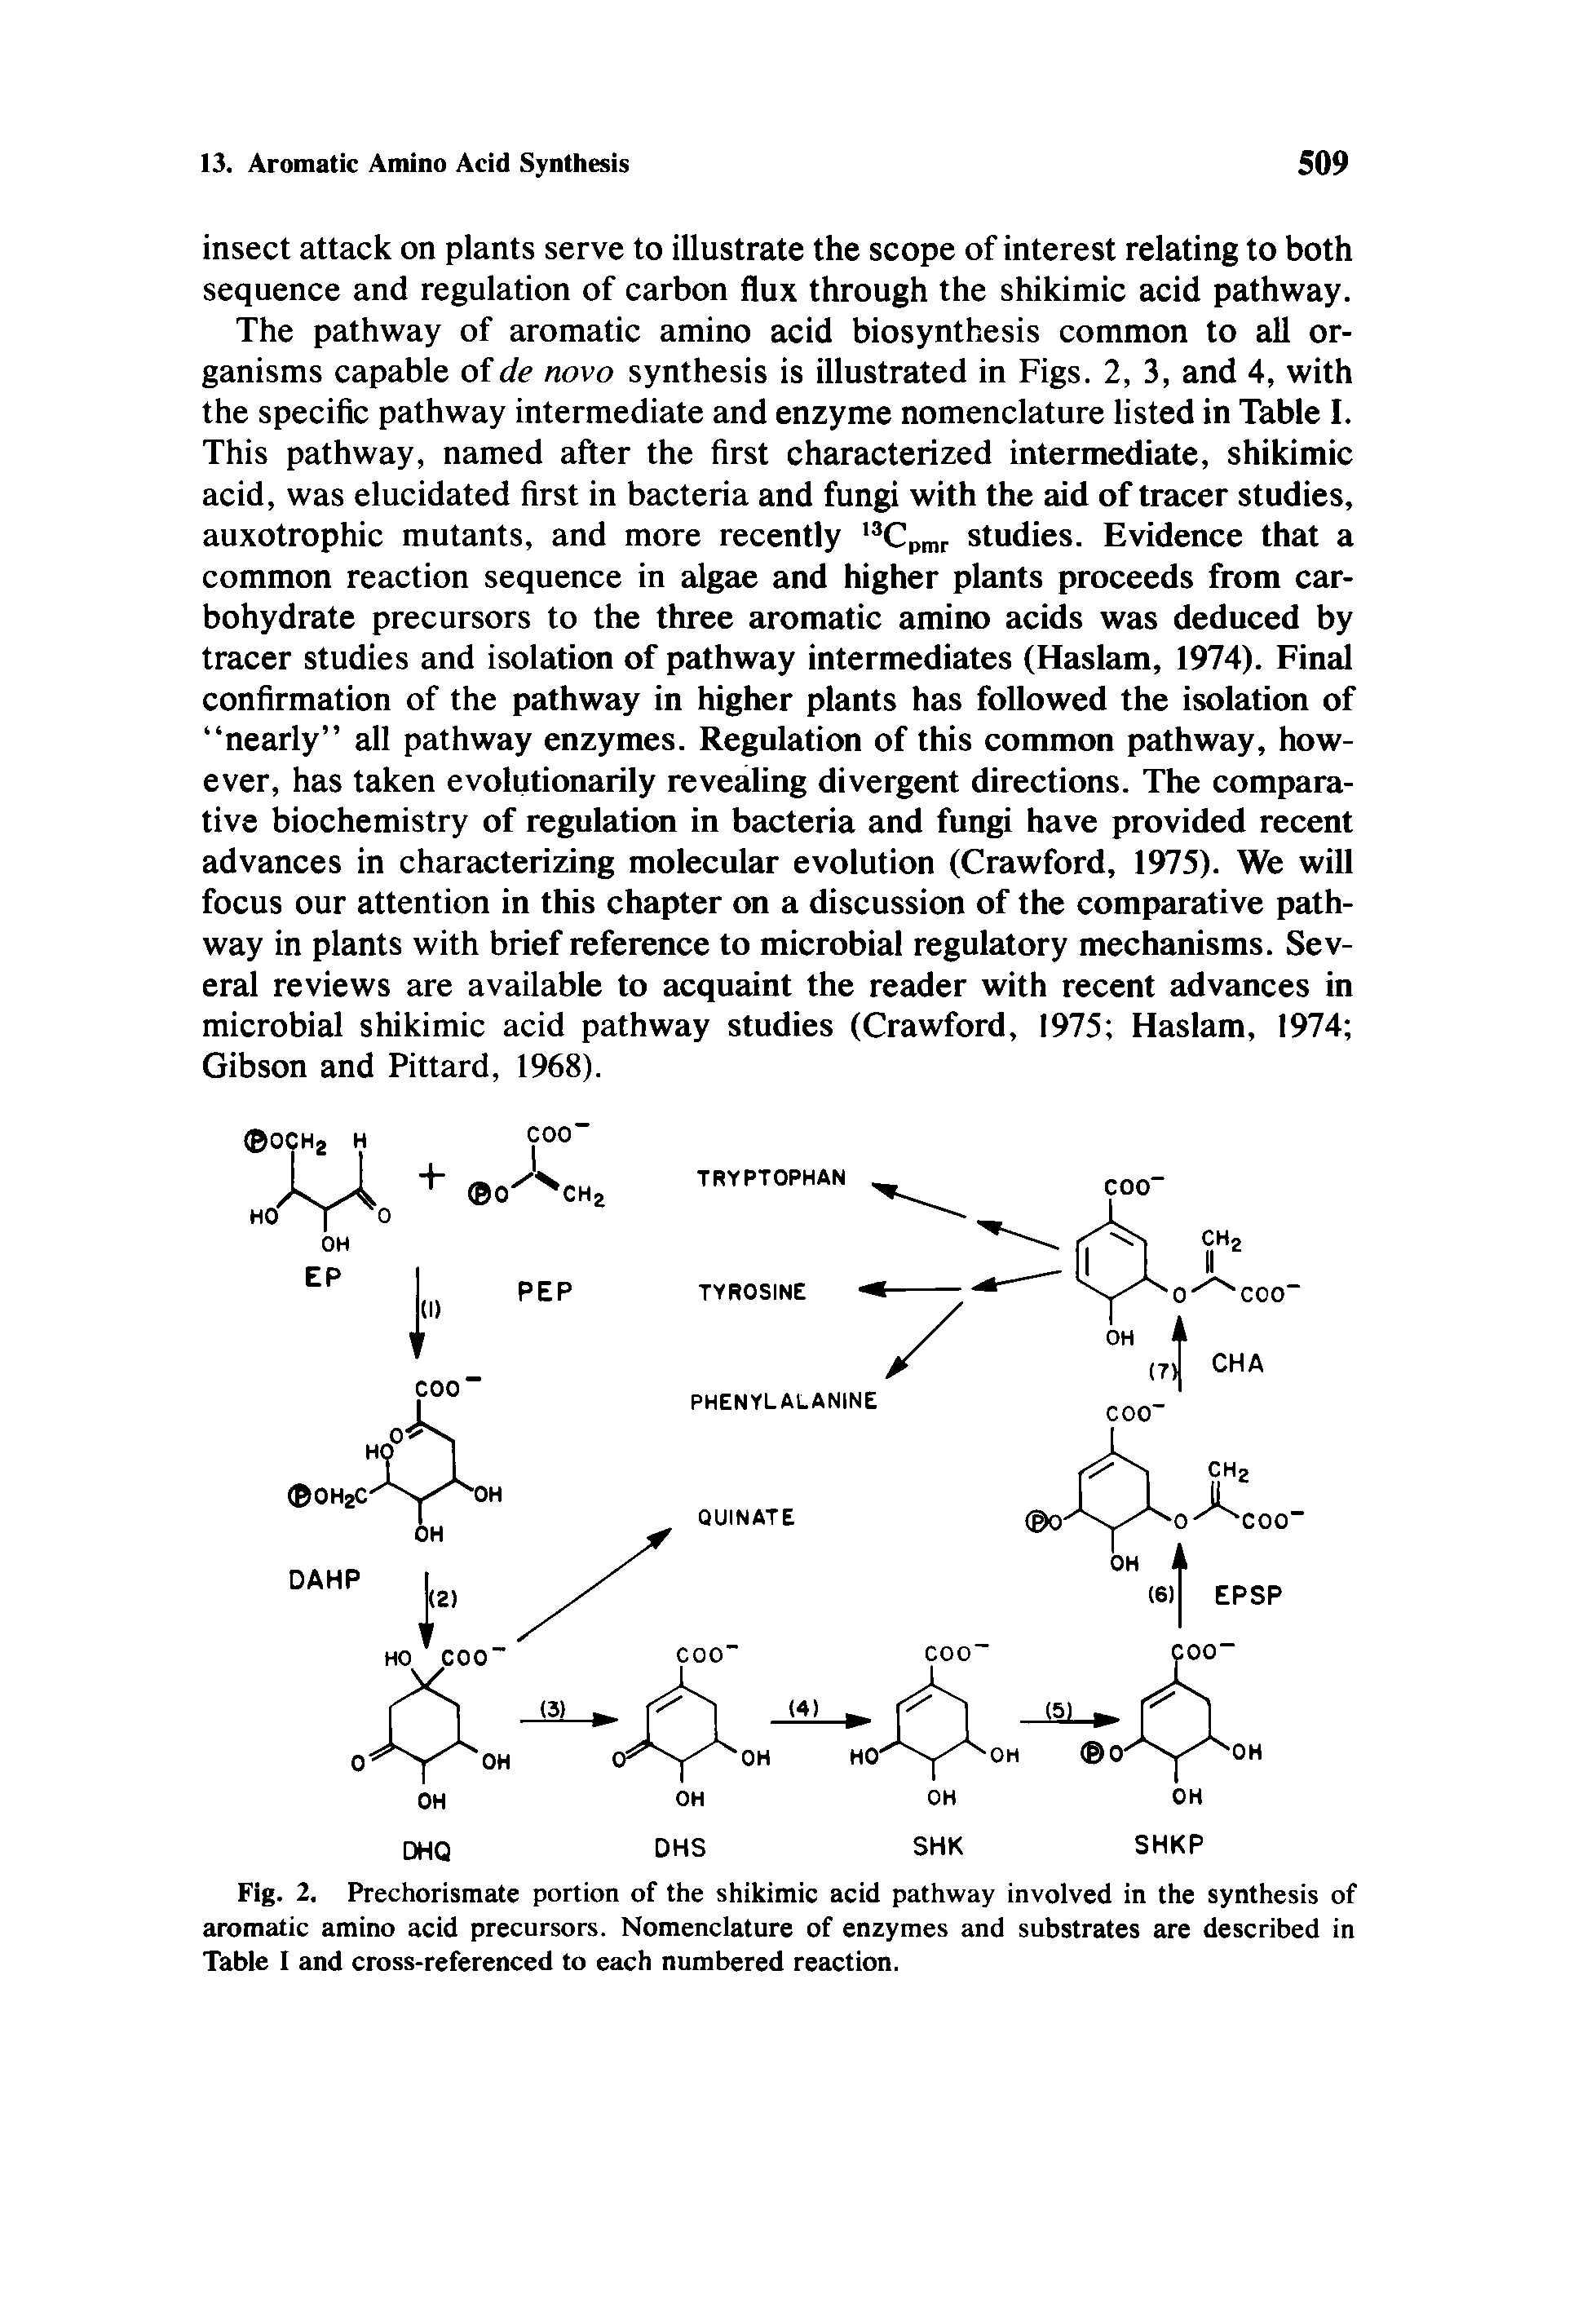 Fig. 2. Prechorismate portion of the shikimic acid pathway involved in the synthesis of aromatic amino acid precursors. Nomenclature of enzymes and substrates are described in Table I and cross-referenced to each numbered reaction.